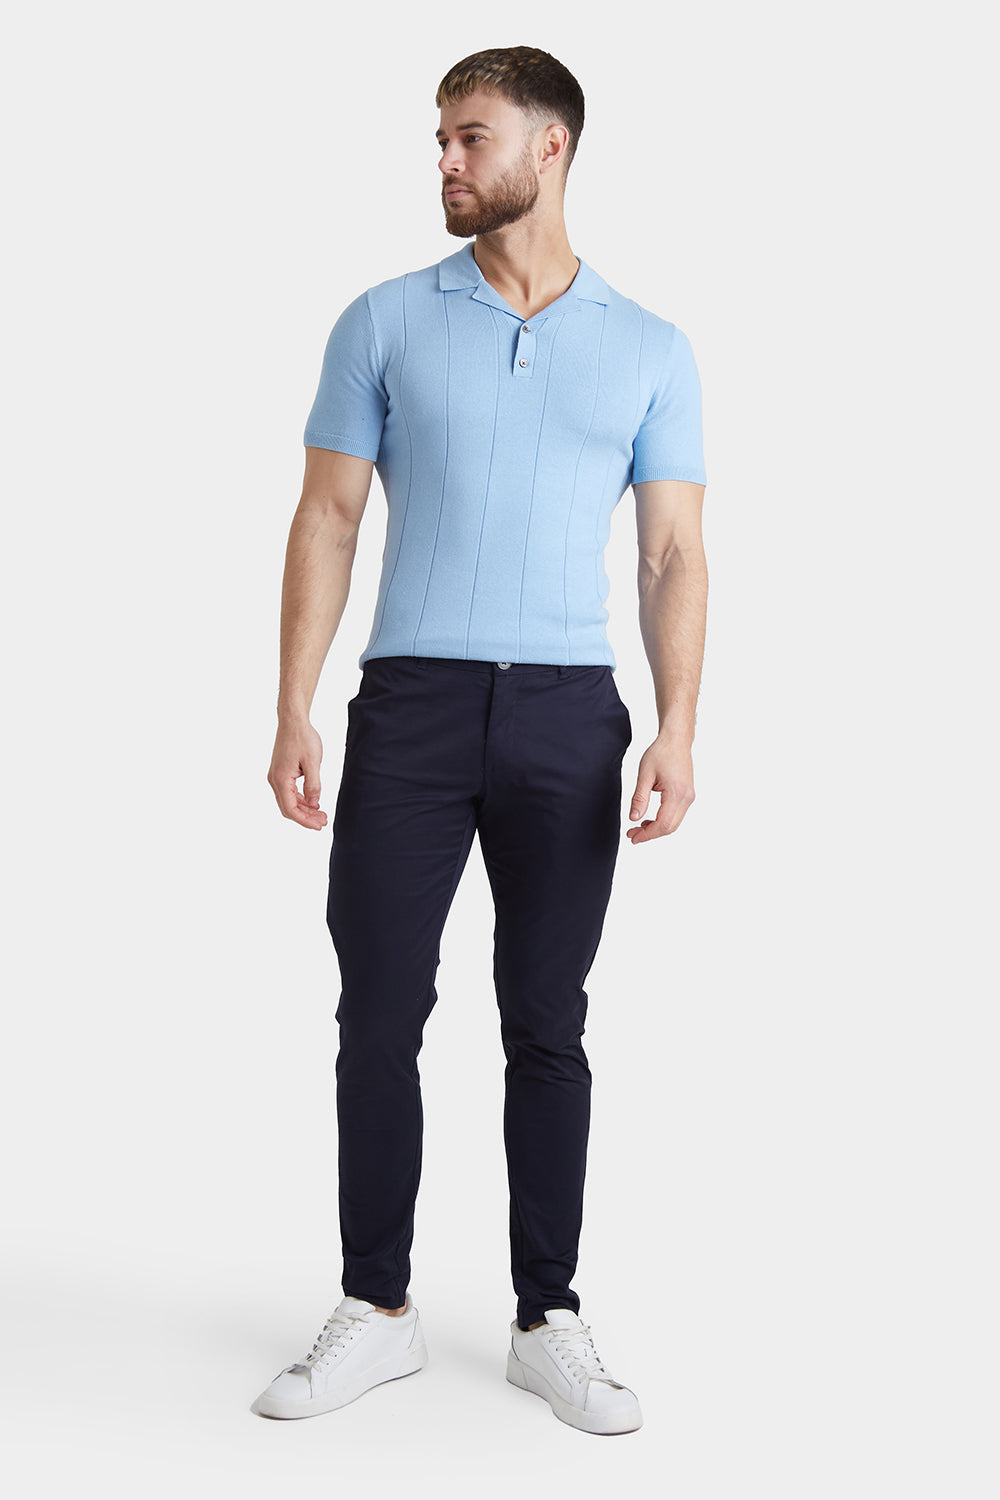 Muscle Fit Cotton Stretch Chino Trouser in Navy - TAILORED ATHLETE - ROW